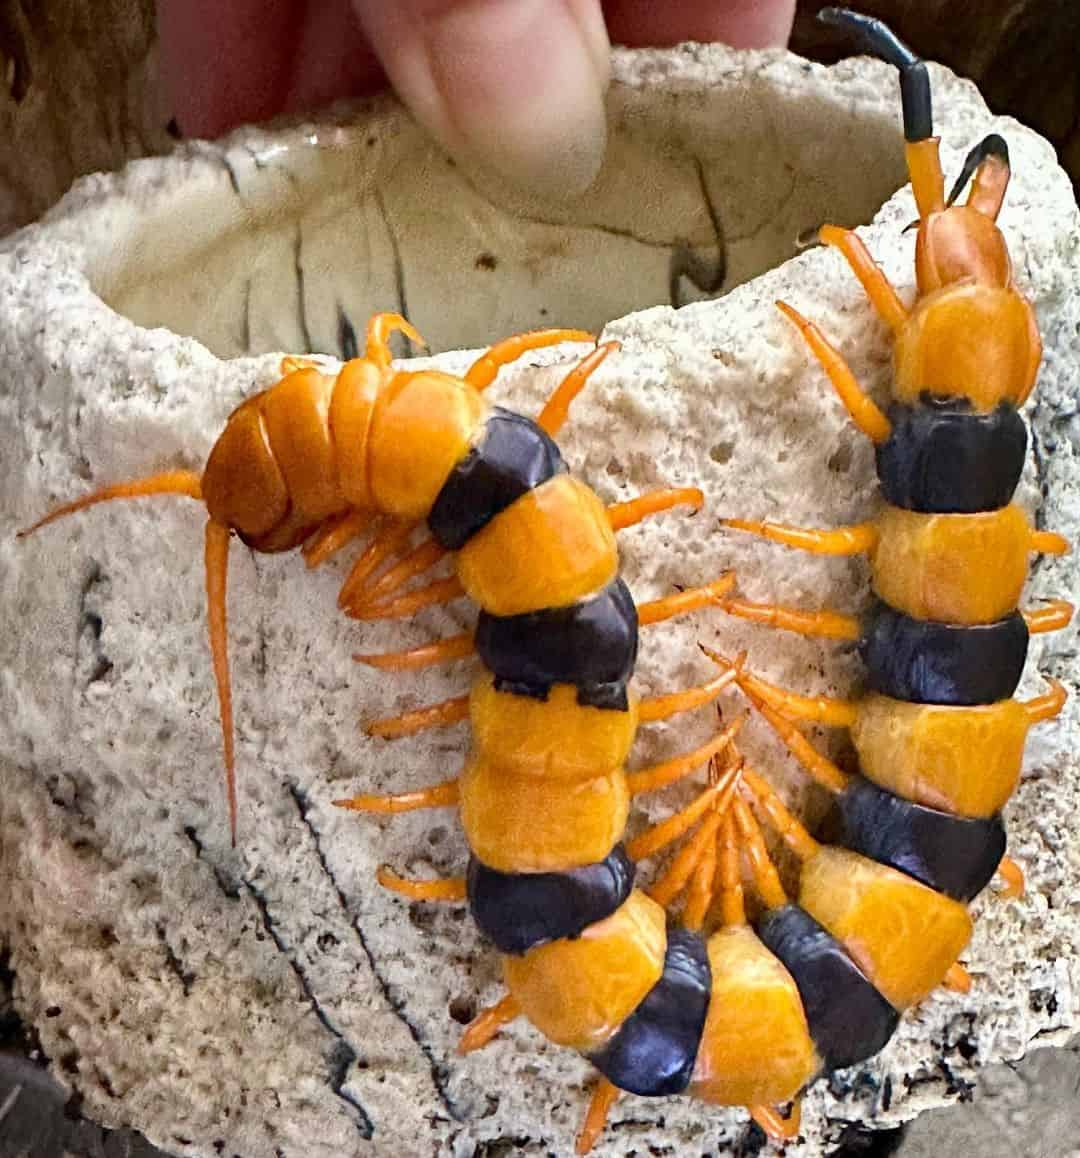 6 Additional Ways to Deter Centipedes from Your Homestead 1